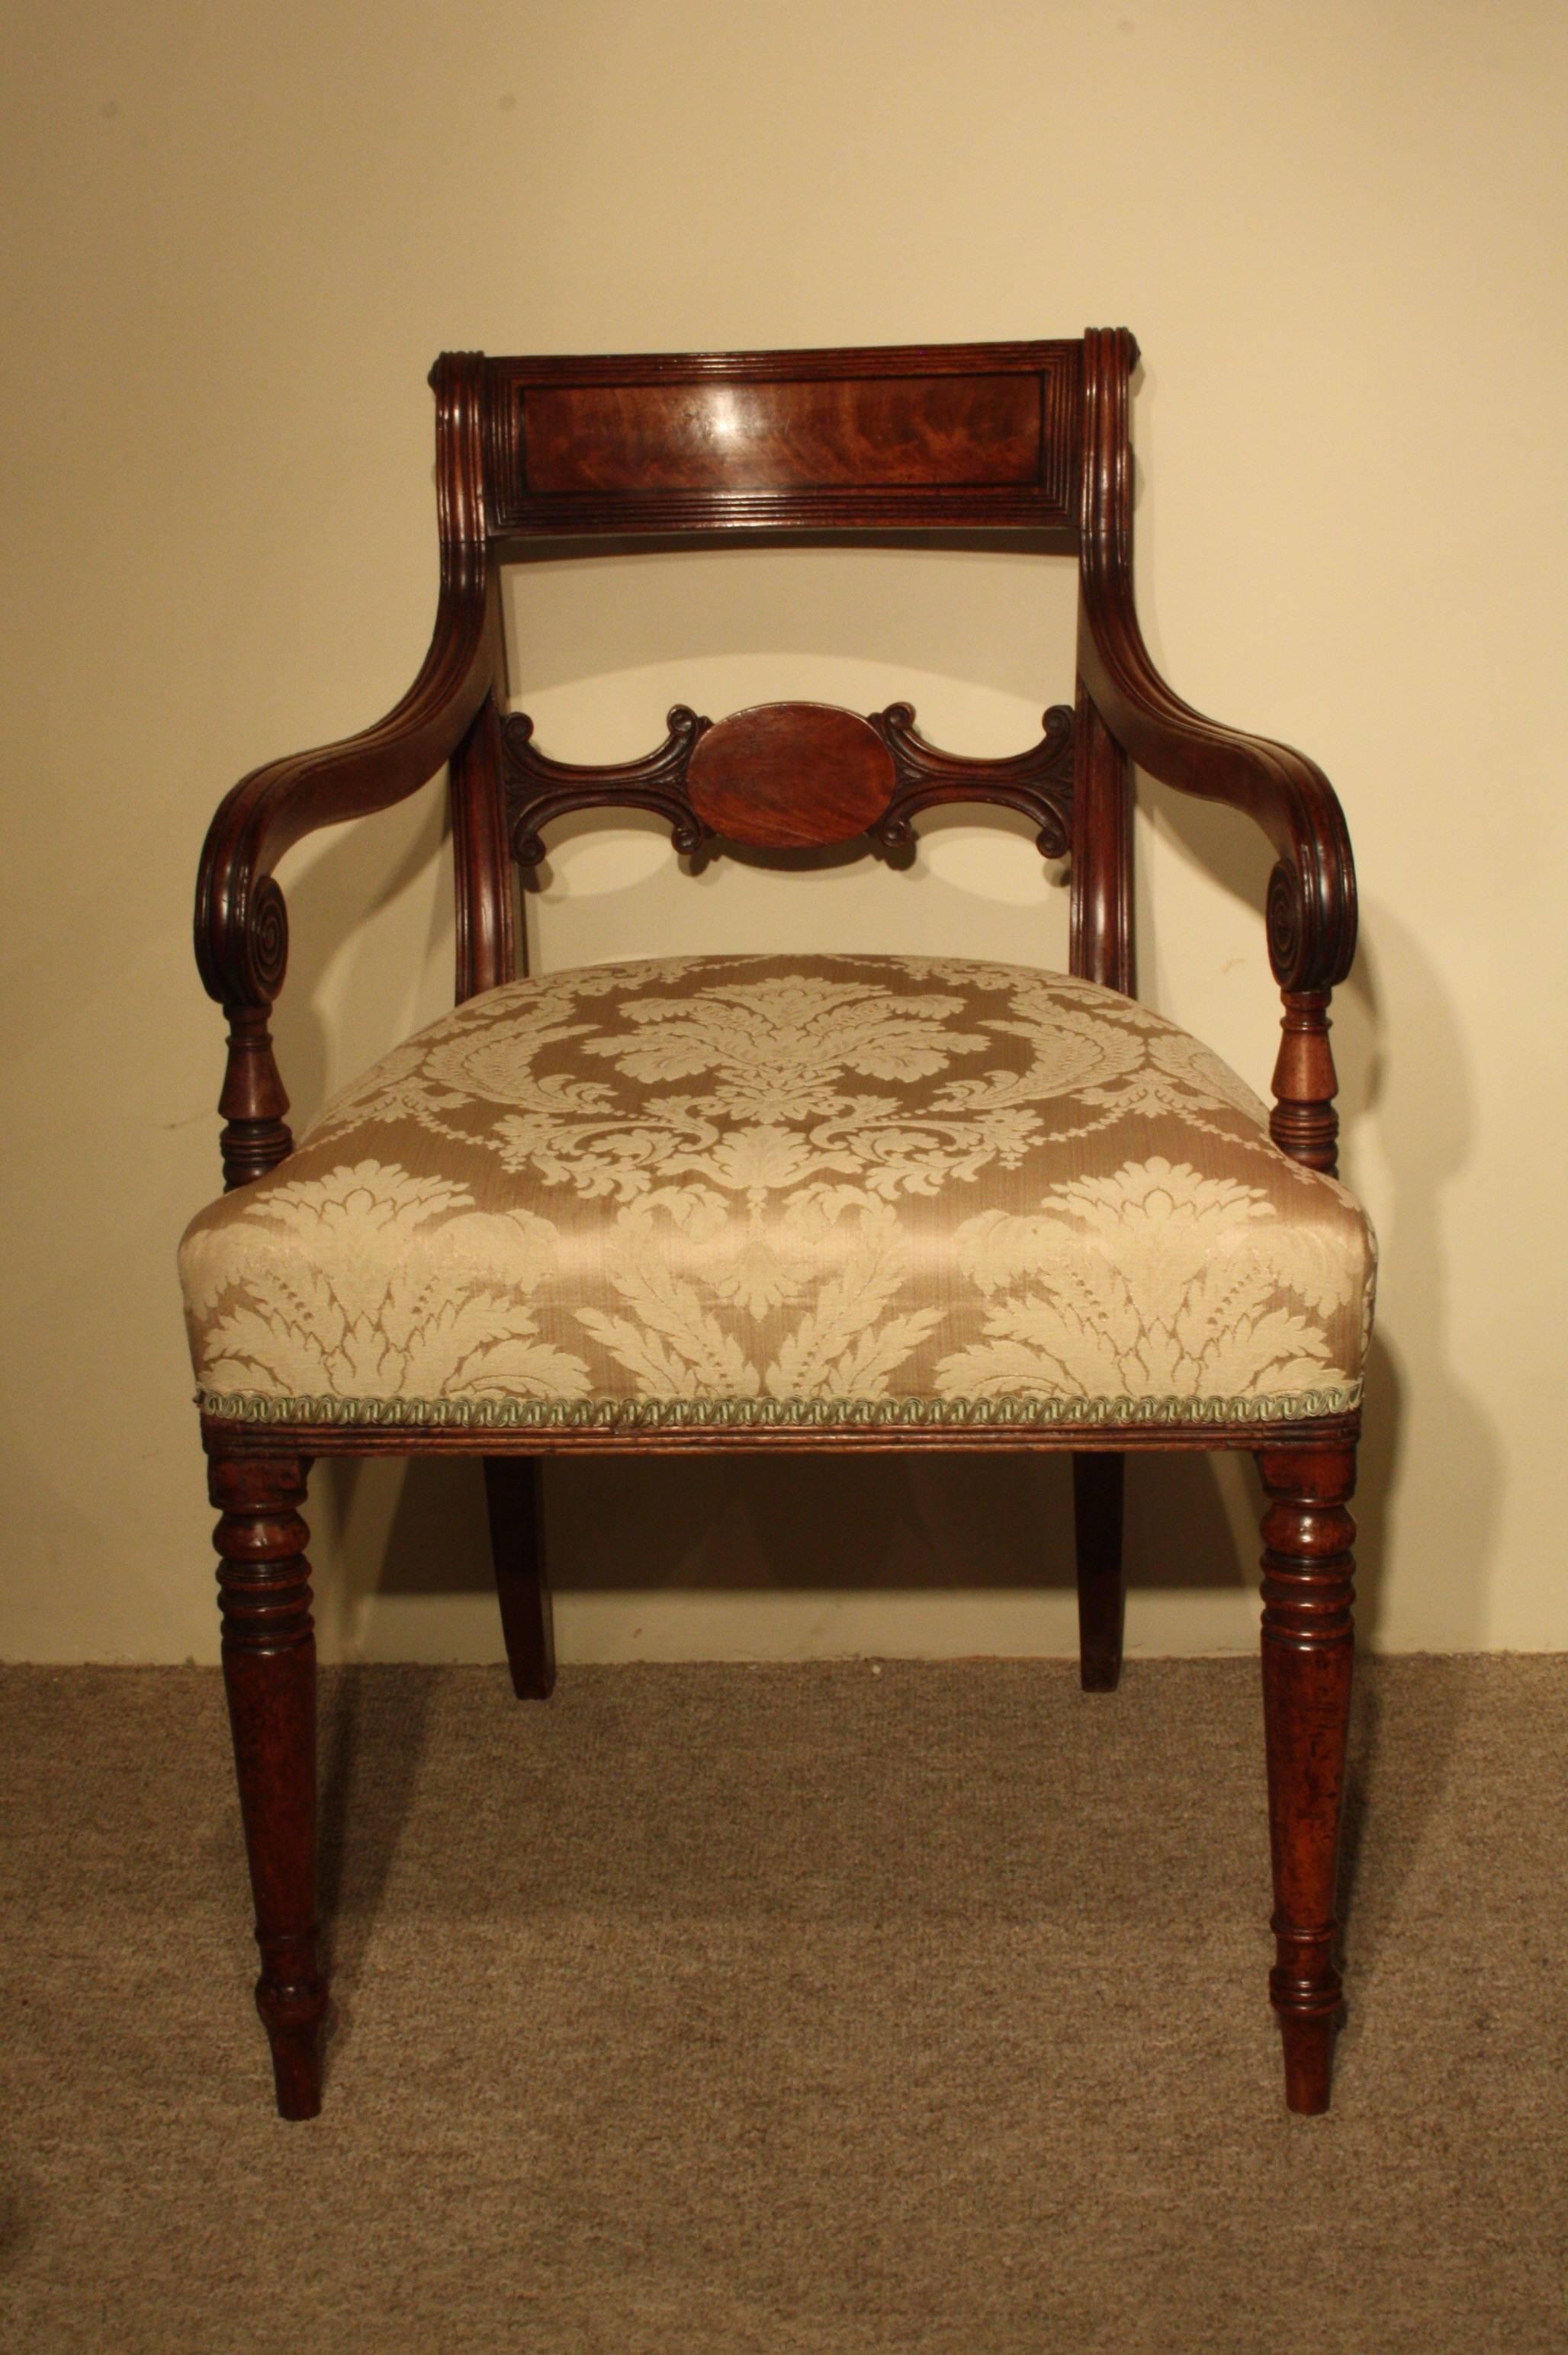 Regency mahogany carver armchair of small proportions upholstered in a light gold damask fabric.